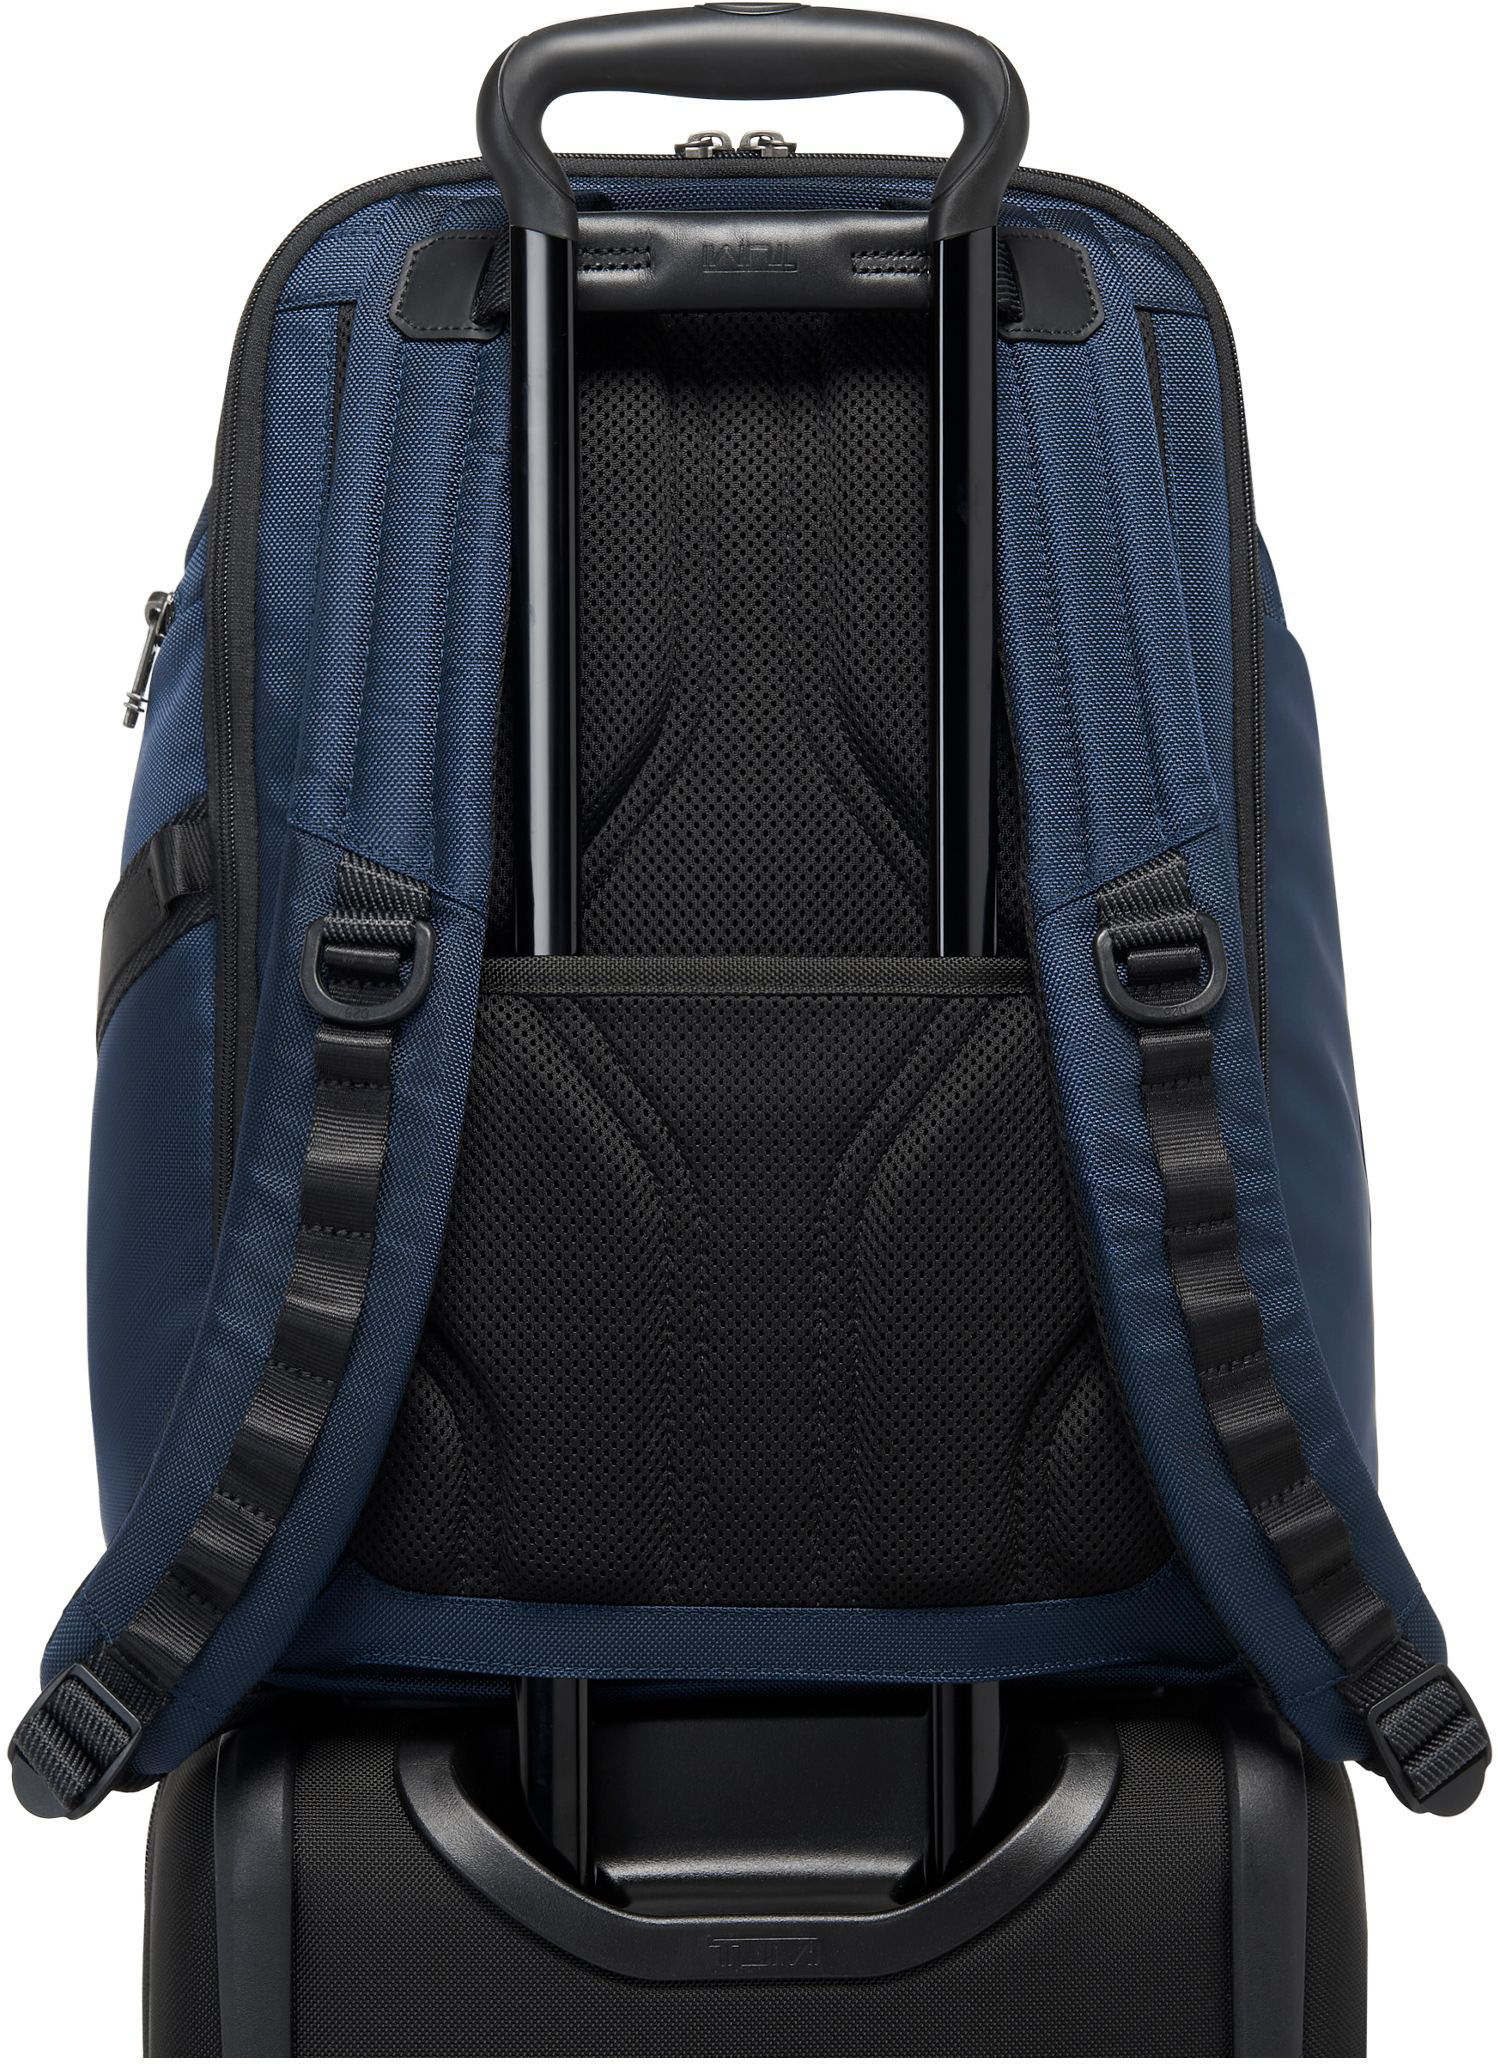 TUMI Alpha Bravo Search Backpack Blue 142480-1596 - Best Buy